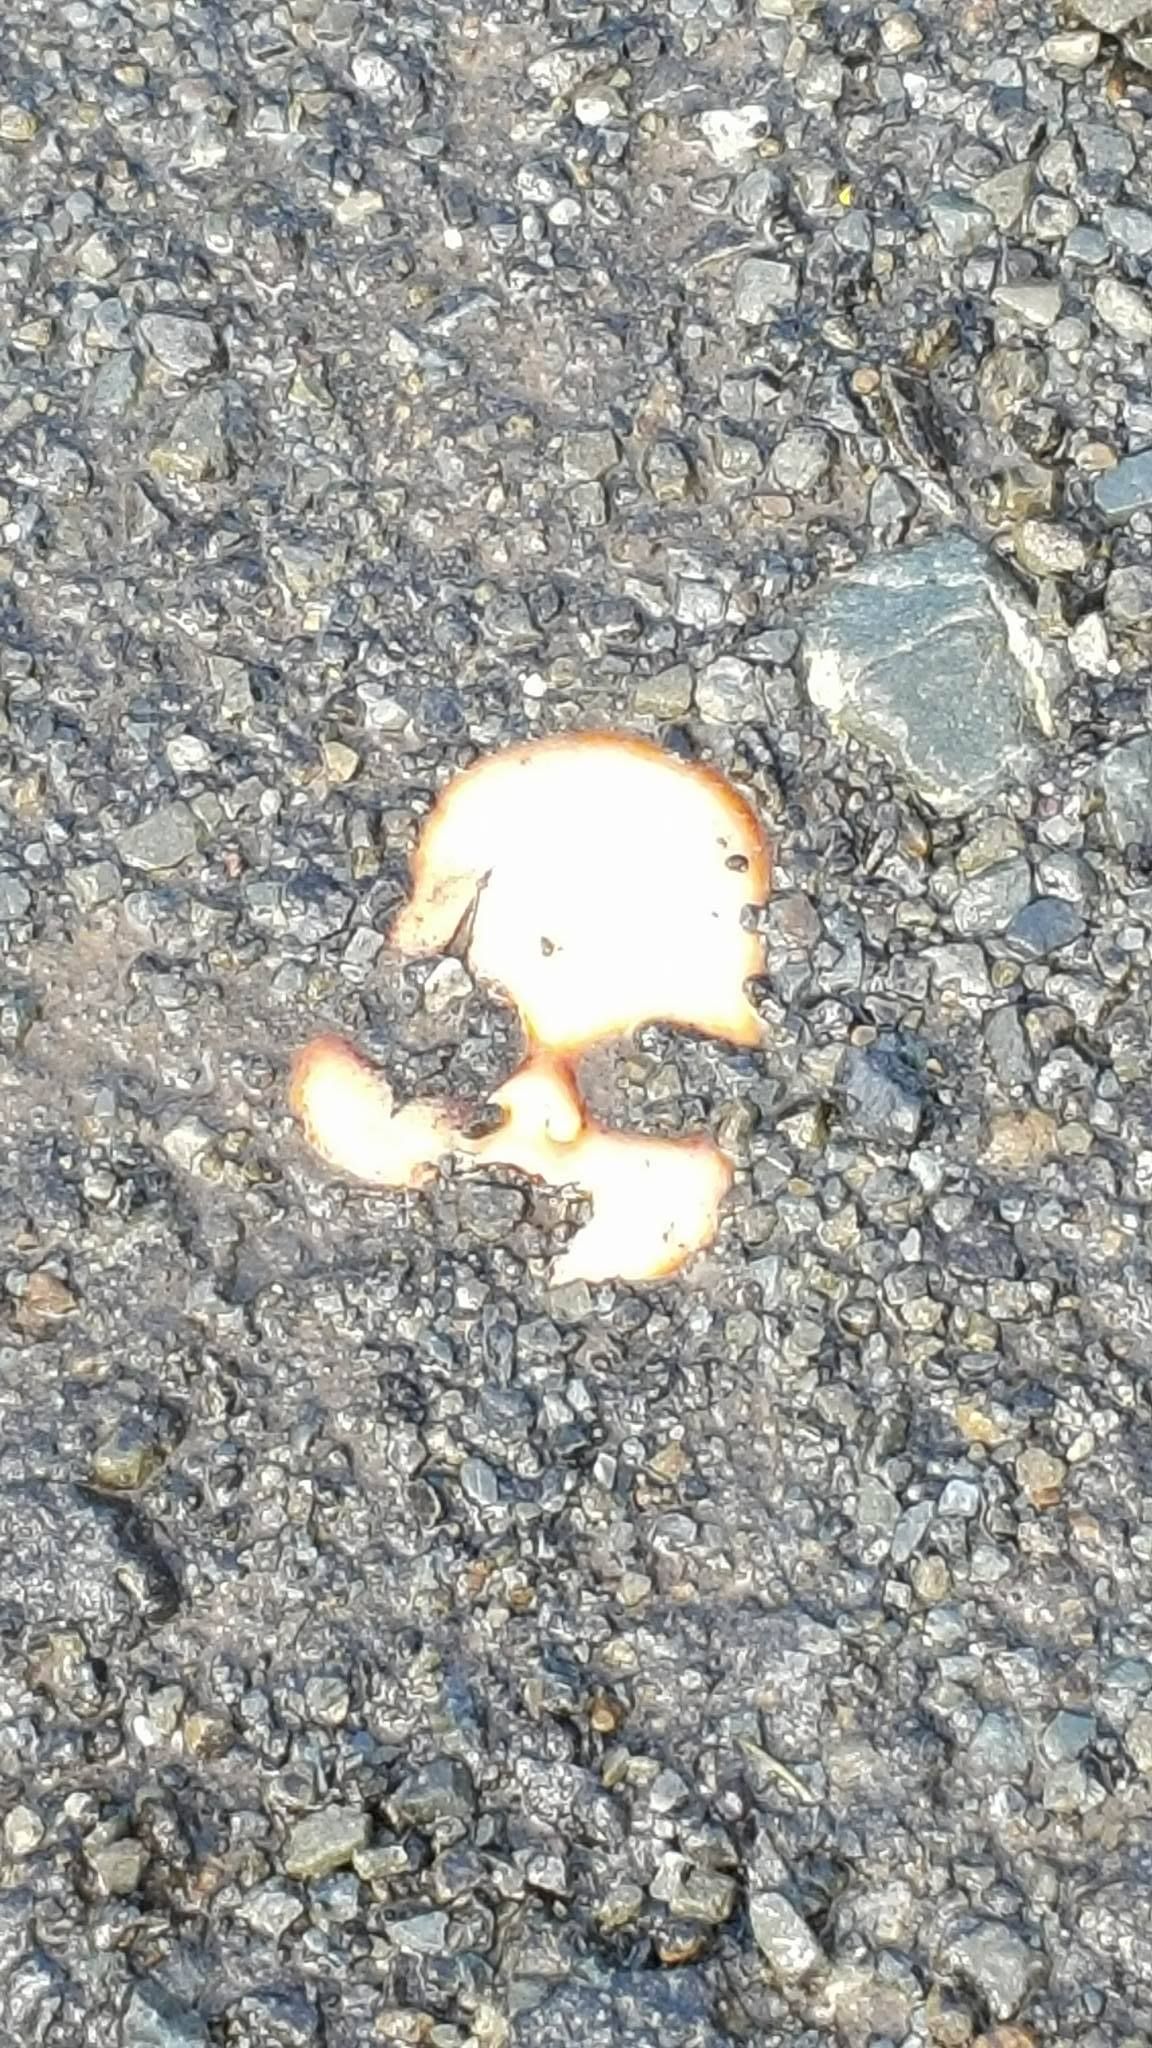 Found this doll face in my driveway, I have no idea how it got there.